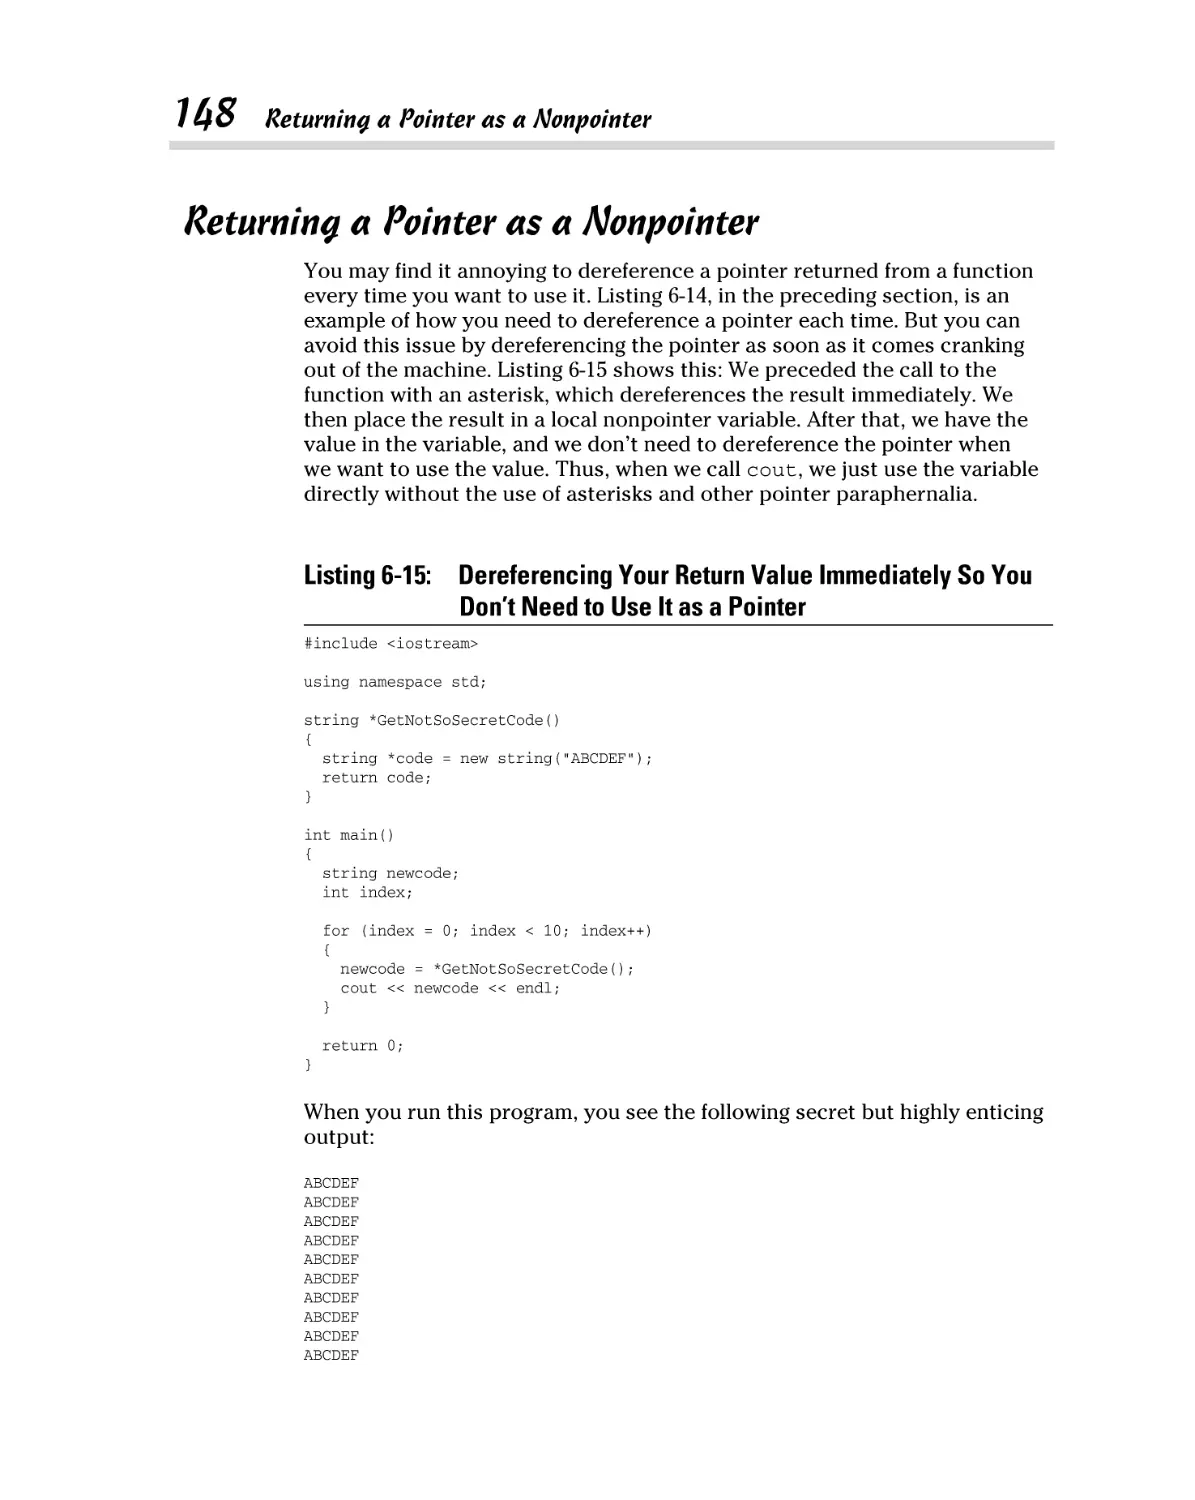 Returning a Pointer as a Nonpointer